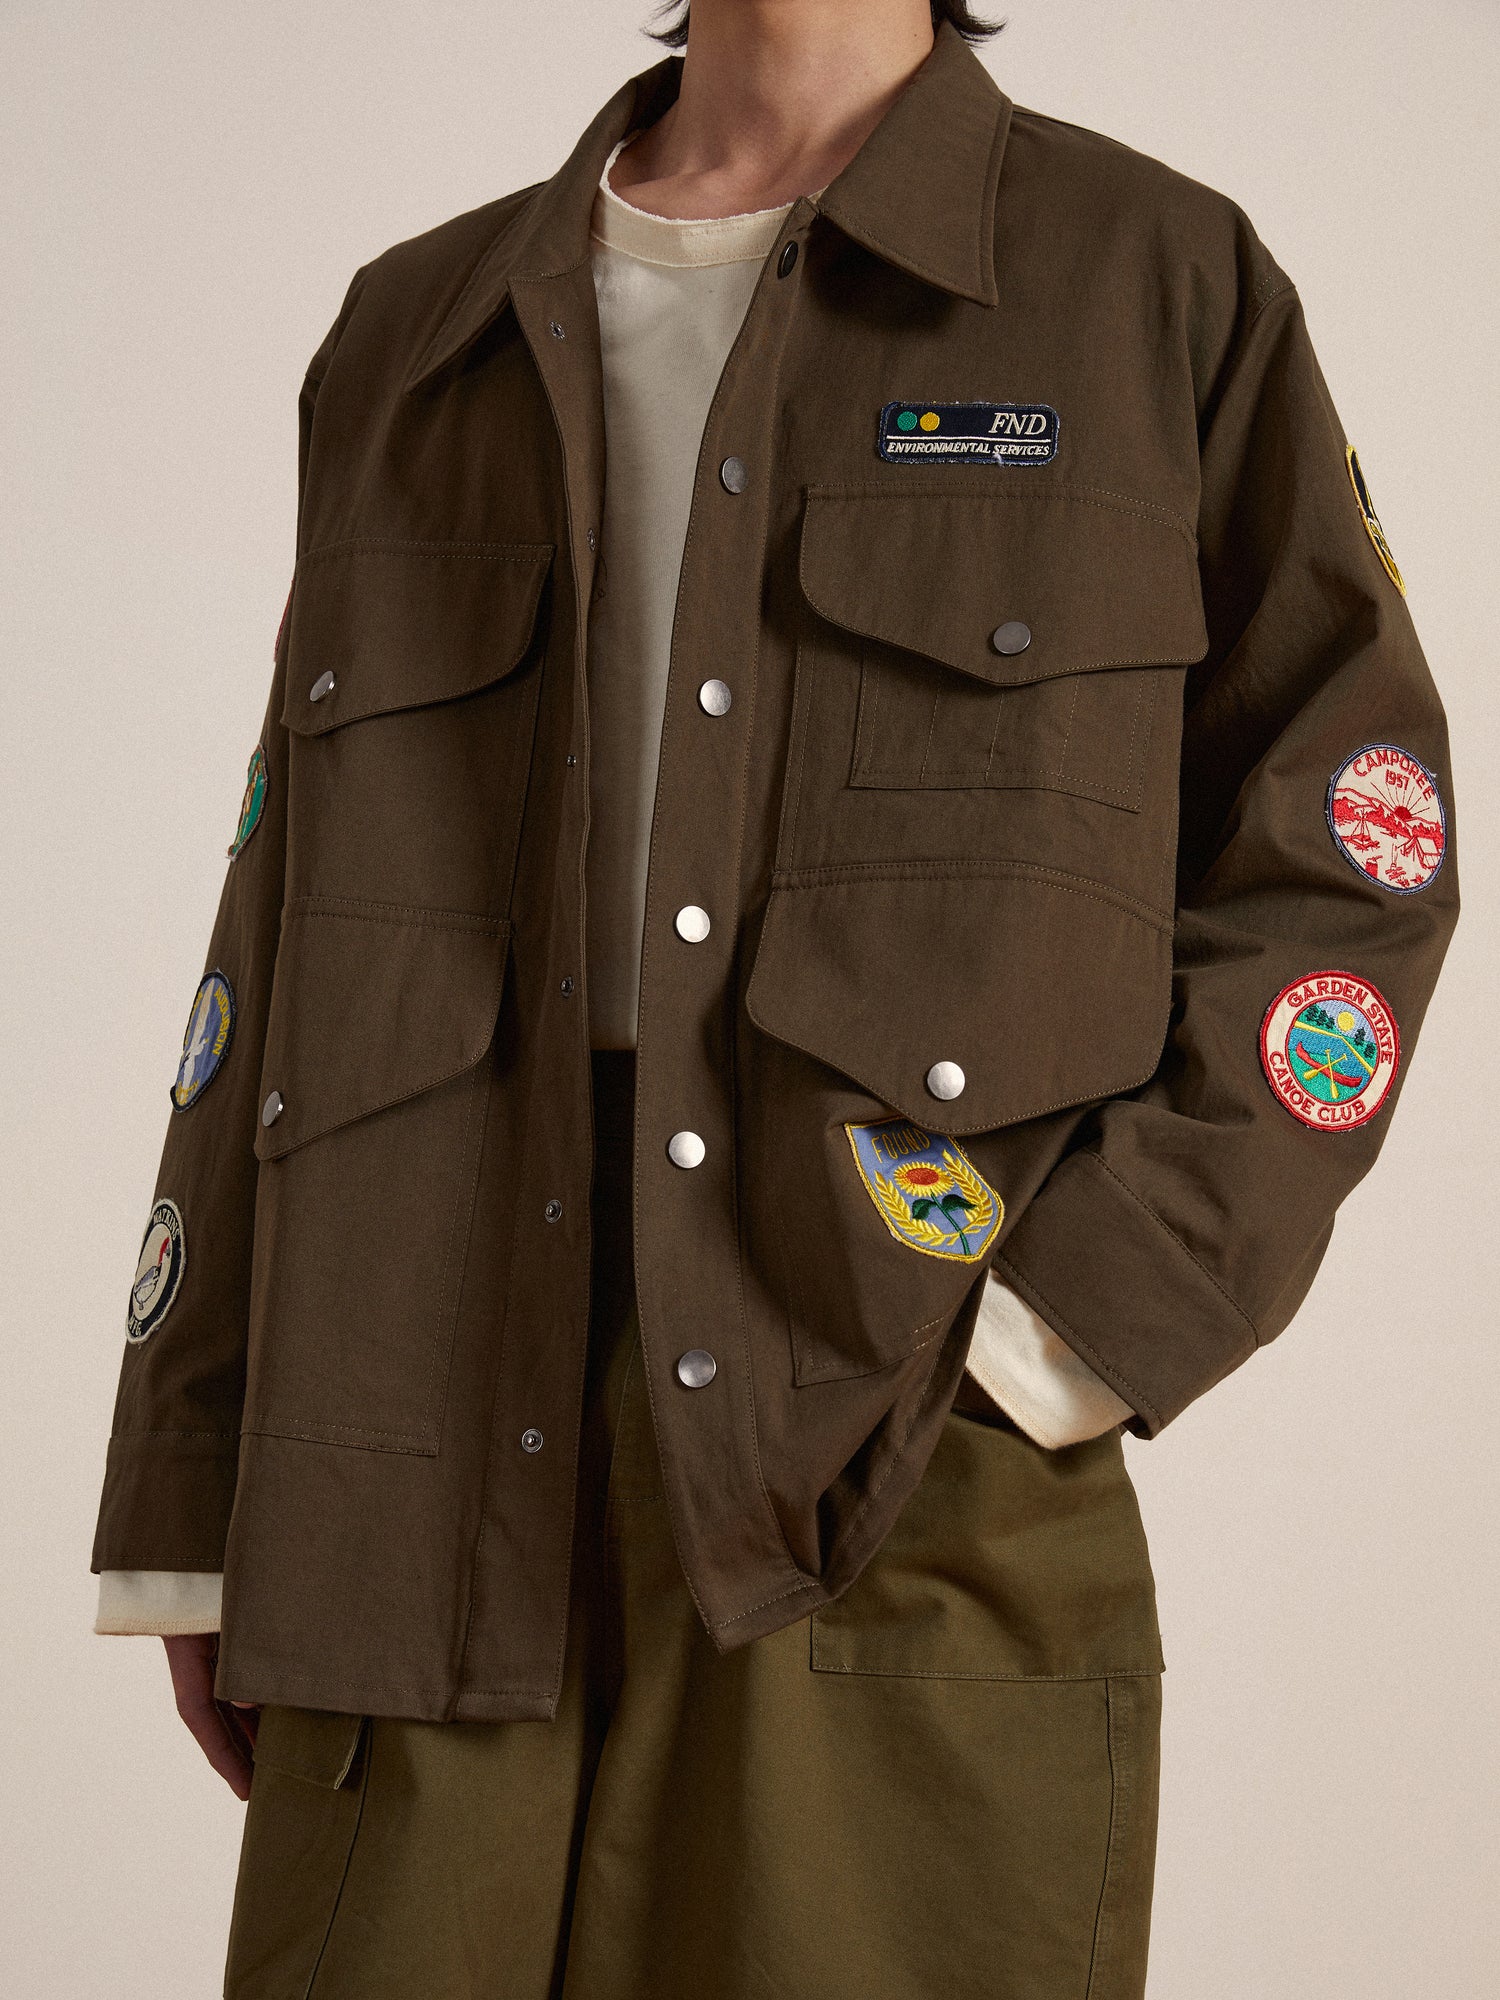 A man wearing a brown Found Ports Park Multi Patch Work Jacket with embroidered patches on it.